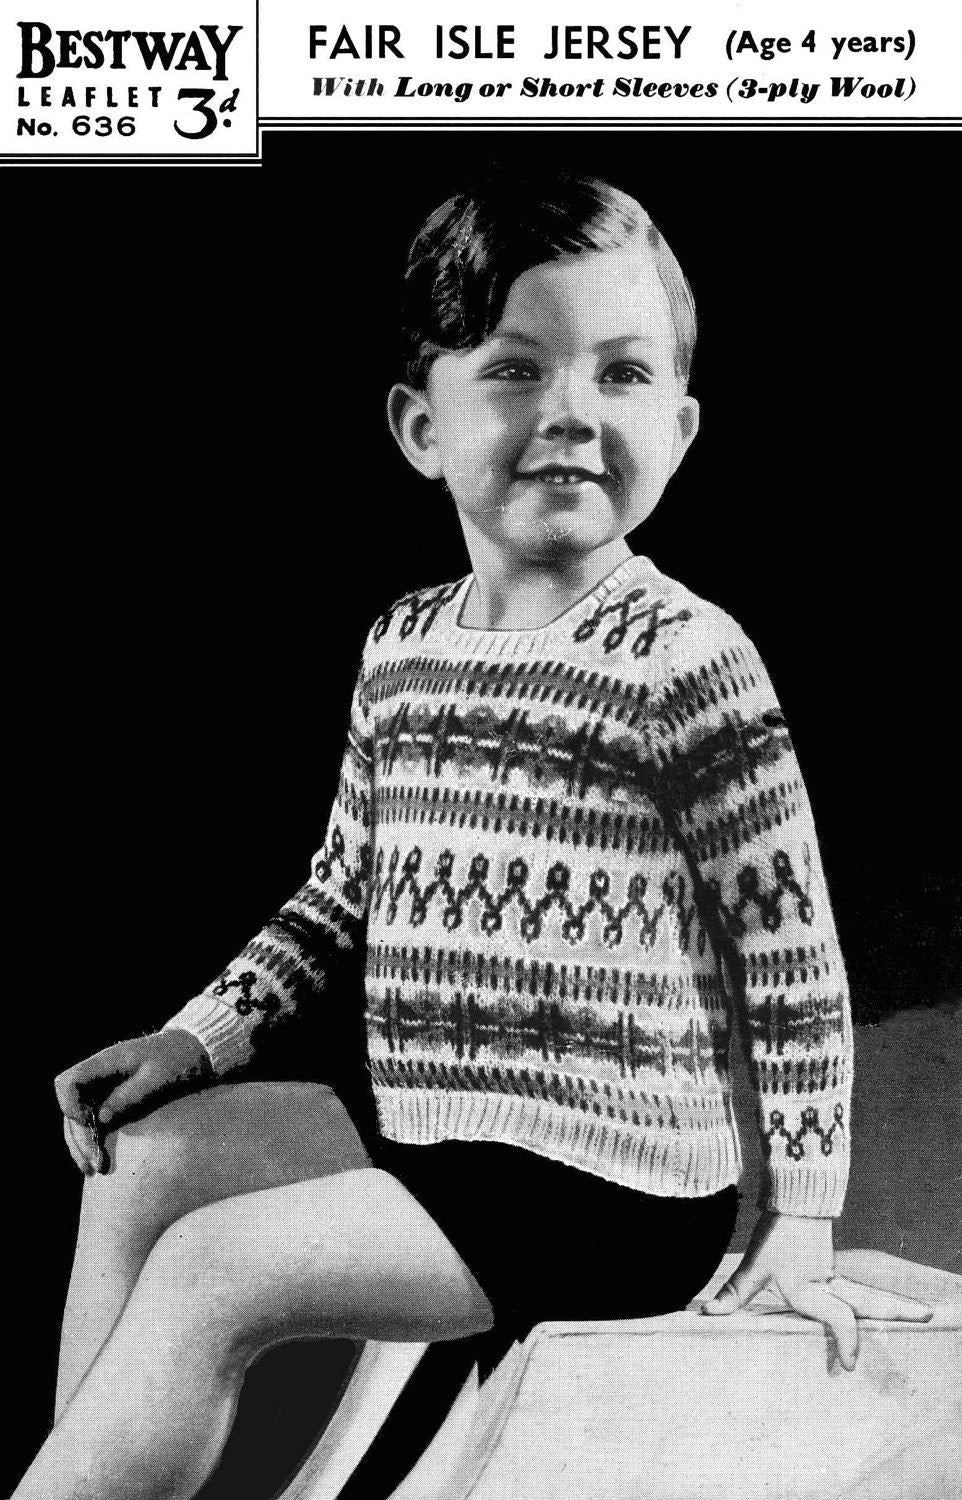 Fair Isle Jumper, Boy & Girl, Long and Short Sleeves, 4 years, 24" Chest, 3ply, 40s Knitting Pattern, Bestway 636